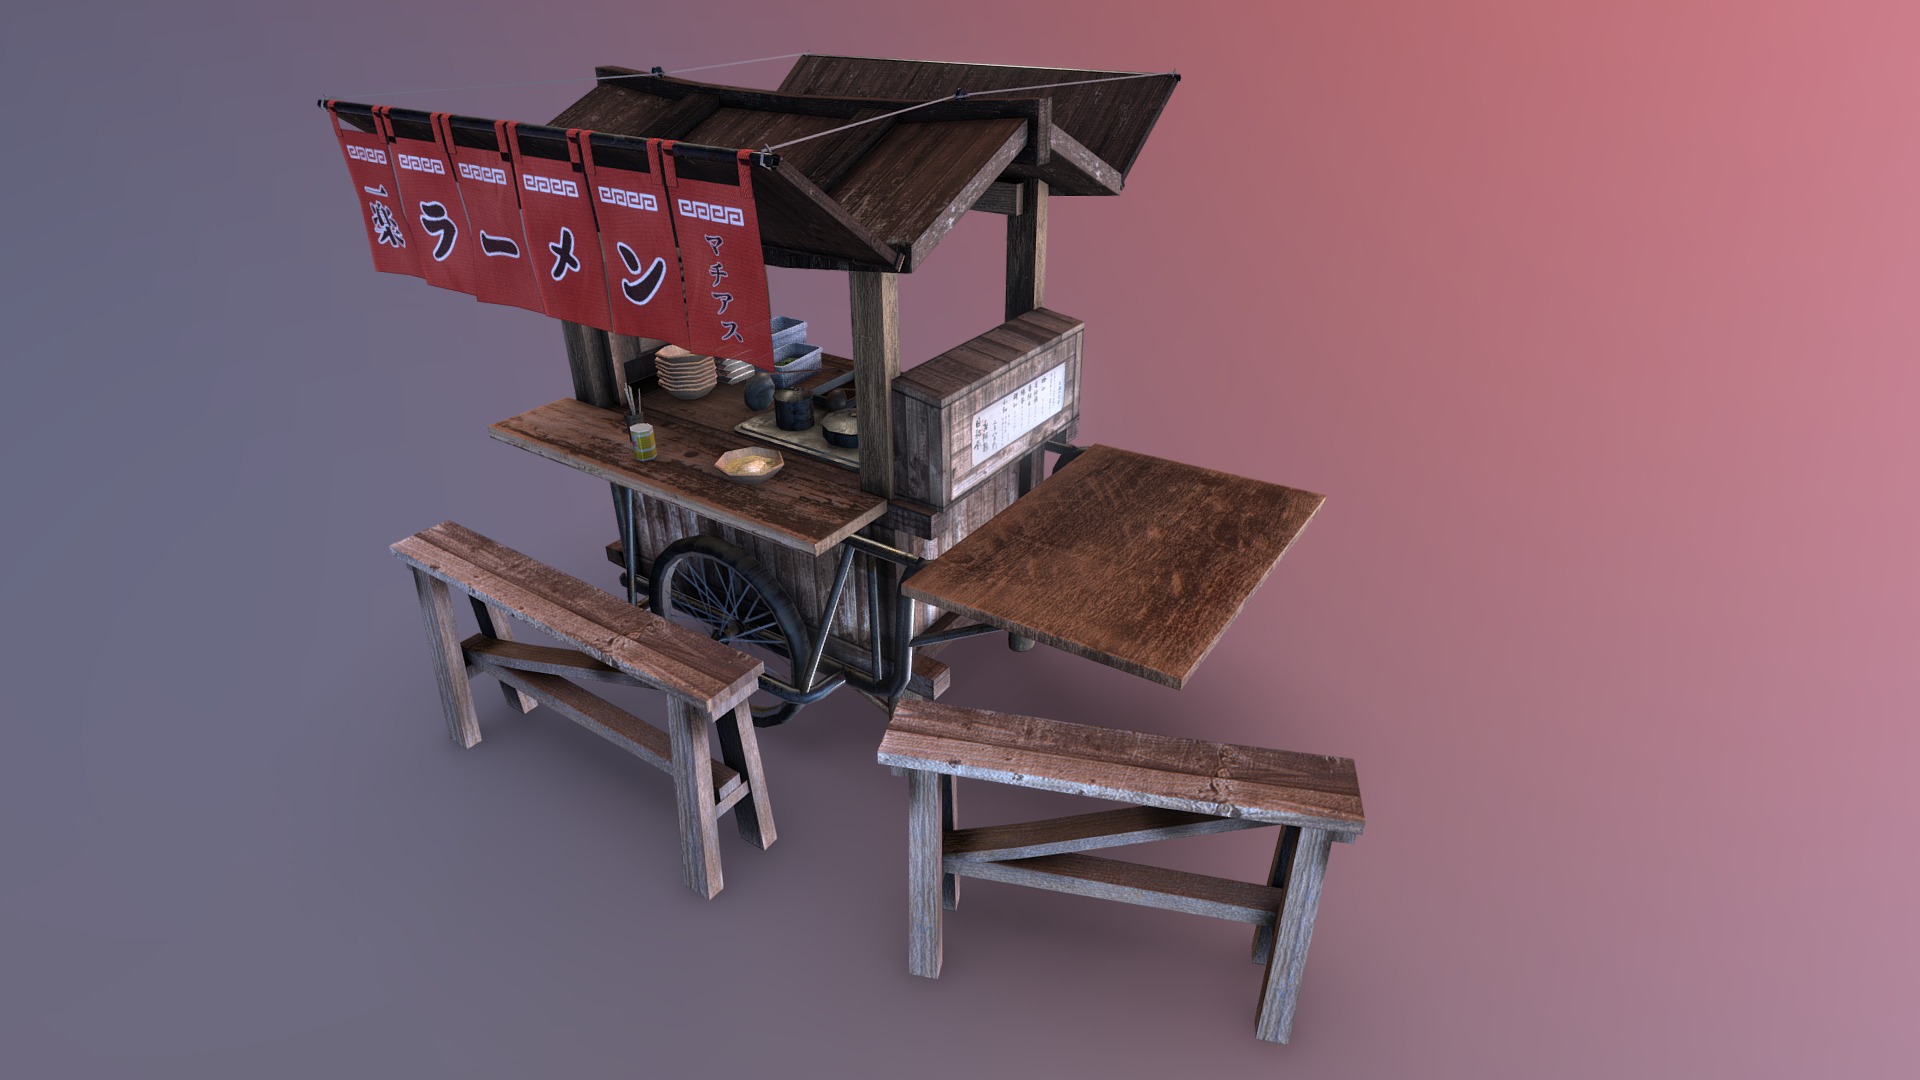 3D model Ramen-Yatai - This is a 3D model of the Ramen-Yatai. The 3D model is about a wooden table with a wheel and a box on top.